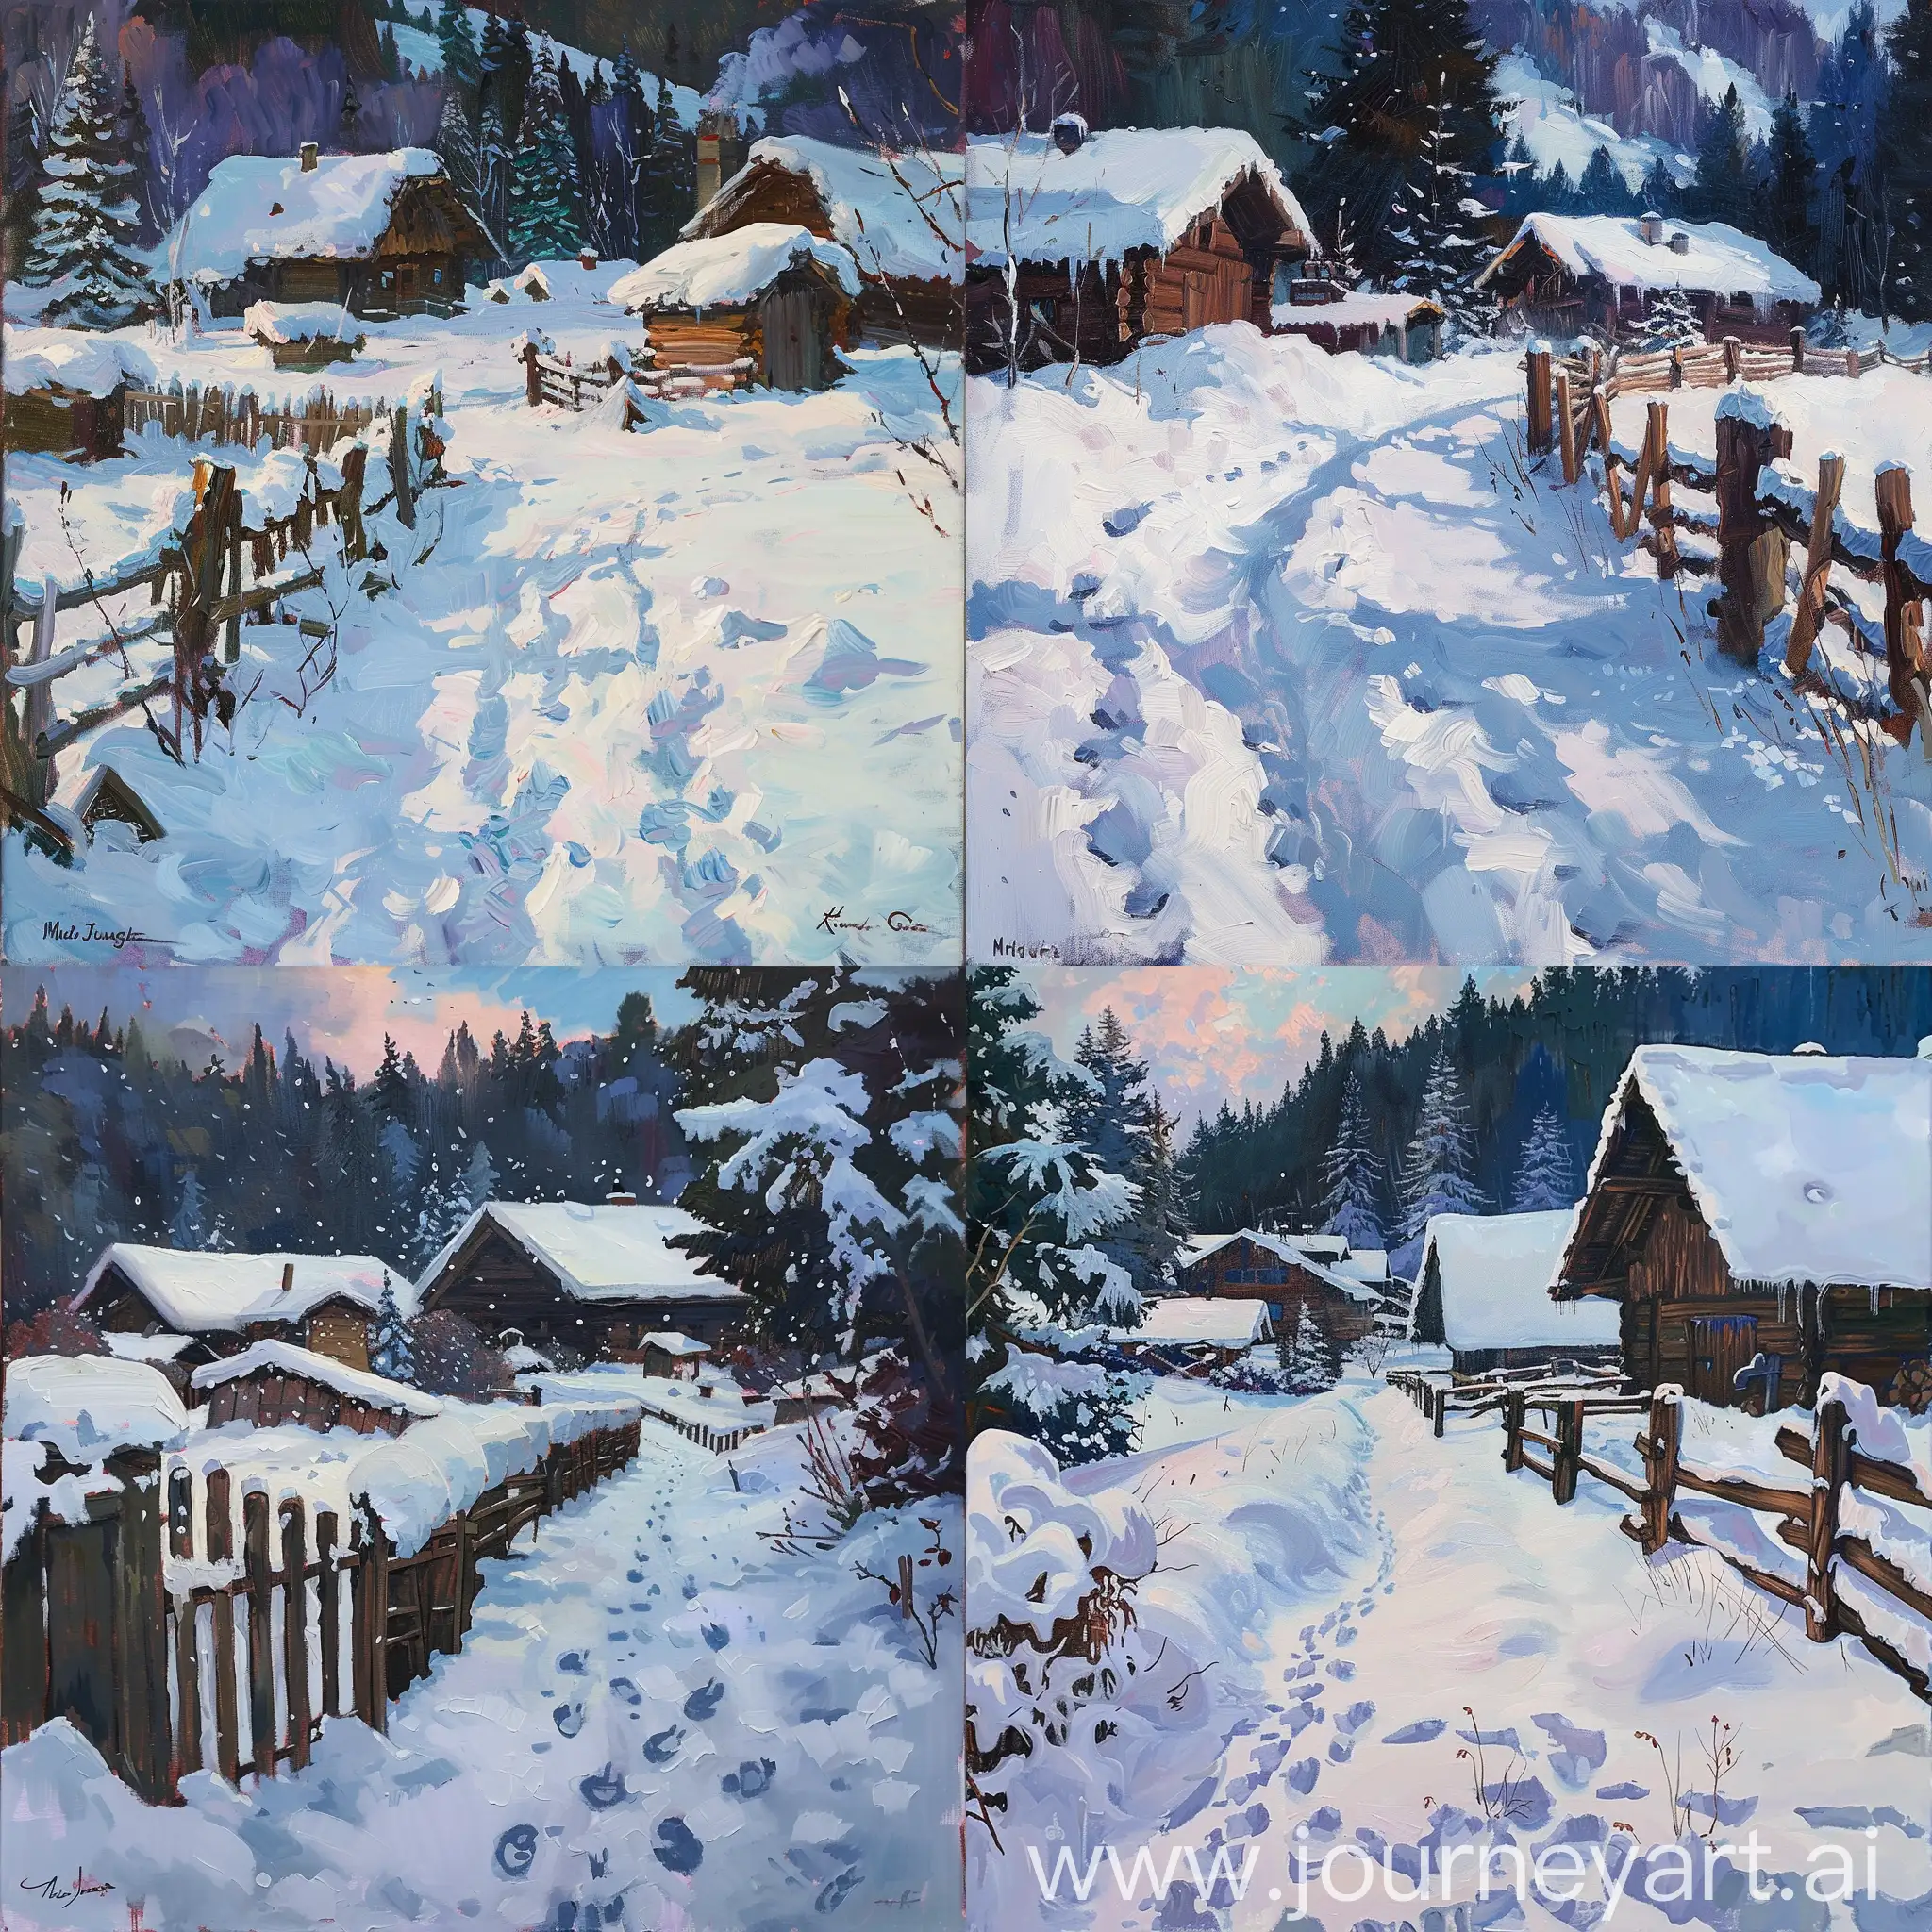 The oil painting depicts a serene winter landscape with a thick blanket of snow covering the ground and rooftops. The scene includes a wooden fence, footprints leading to wooden chalets, and a forest in the background. The colors used are various shades of white and blue for the snow, dark brown for the wooden elements, dark green for the trees, and pale blue with hints of purple and pink for the sky.

Here is a prompt for the Mid Journey app to recreate something similar:
"Create a serene winter landscape painting featuring a snowy scene with wooden fences, footprints leading to wooden chalets, and a dense coniferous forest in the background. Use shades of white, blue, dark brown, dark green, and pale blue with hints of purple and pink to capture the essence of a peaceful winter day. Pay attention to details like snow textures, wooden structures, and tree branches laden with snow."
--ar 16:6 --c 3